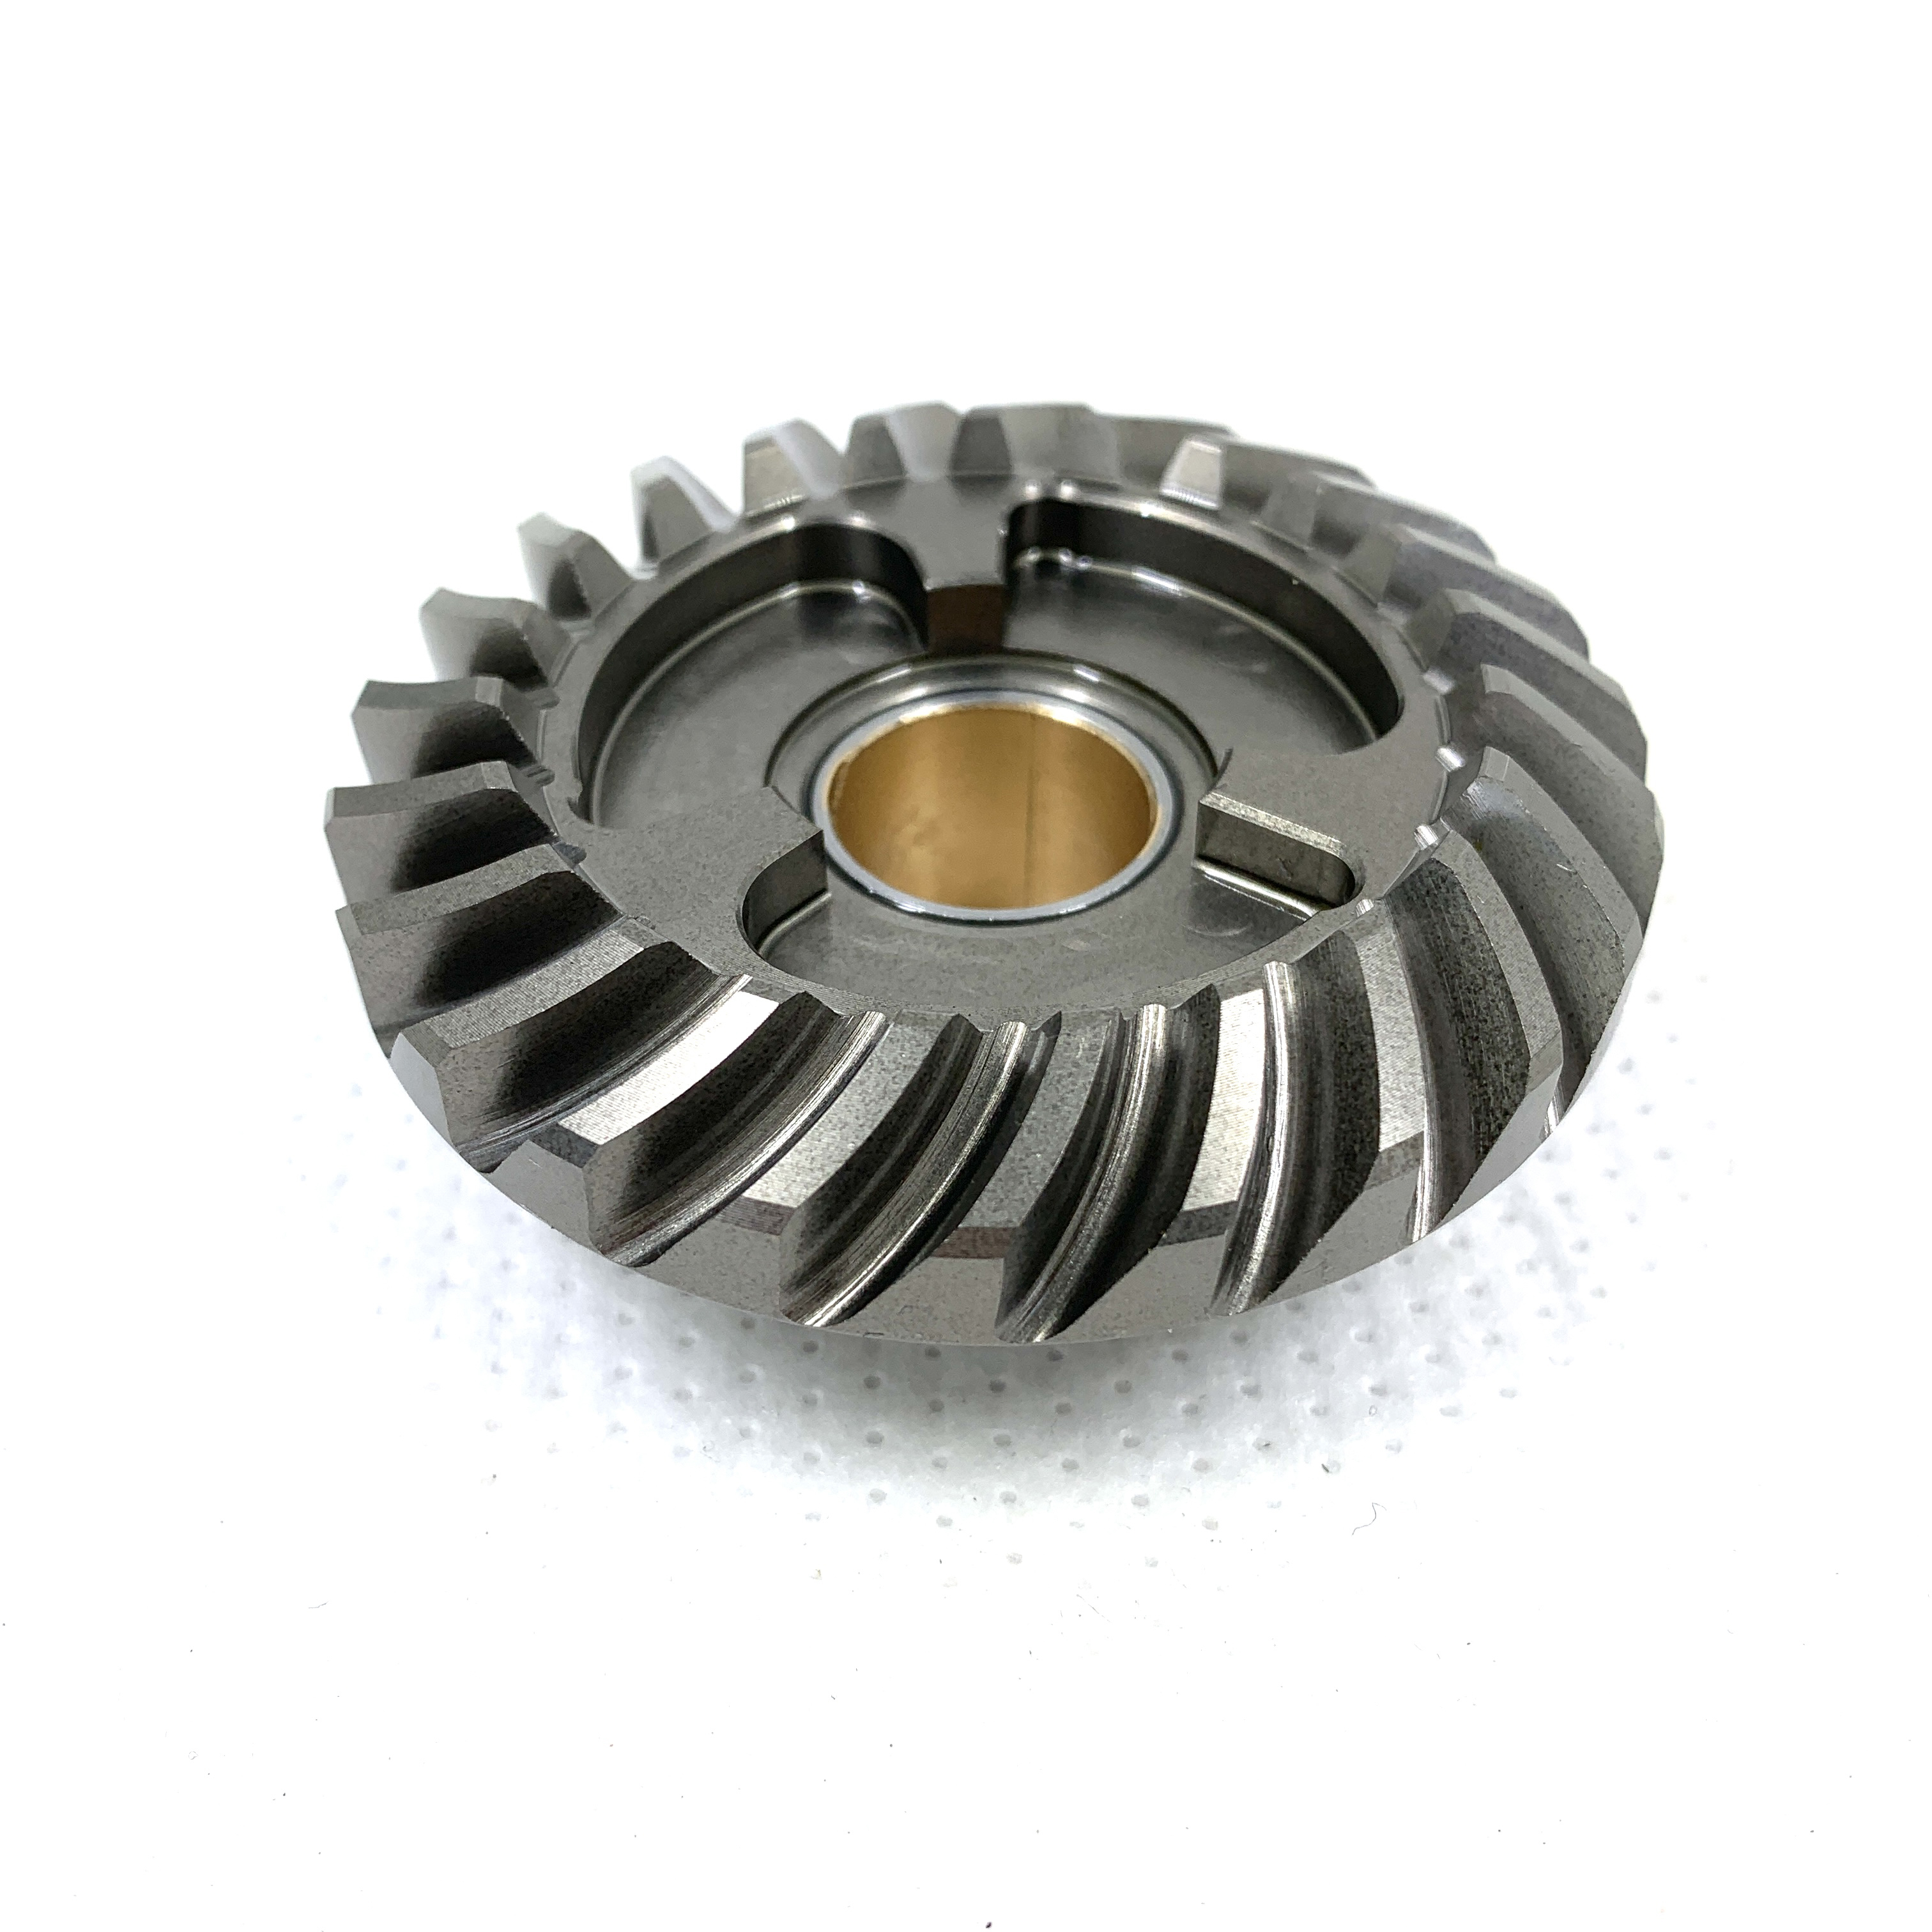 FORWARD BEVEL GEAR A 346-64010-1 0 fit for Tohatsu Nissan 25HP 30HP Motor engranaje 346-64010-0